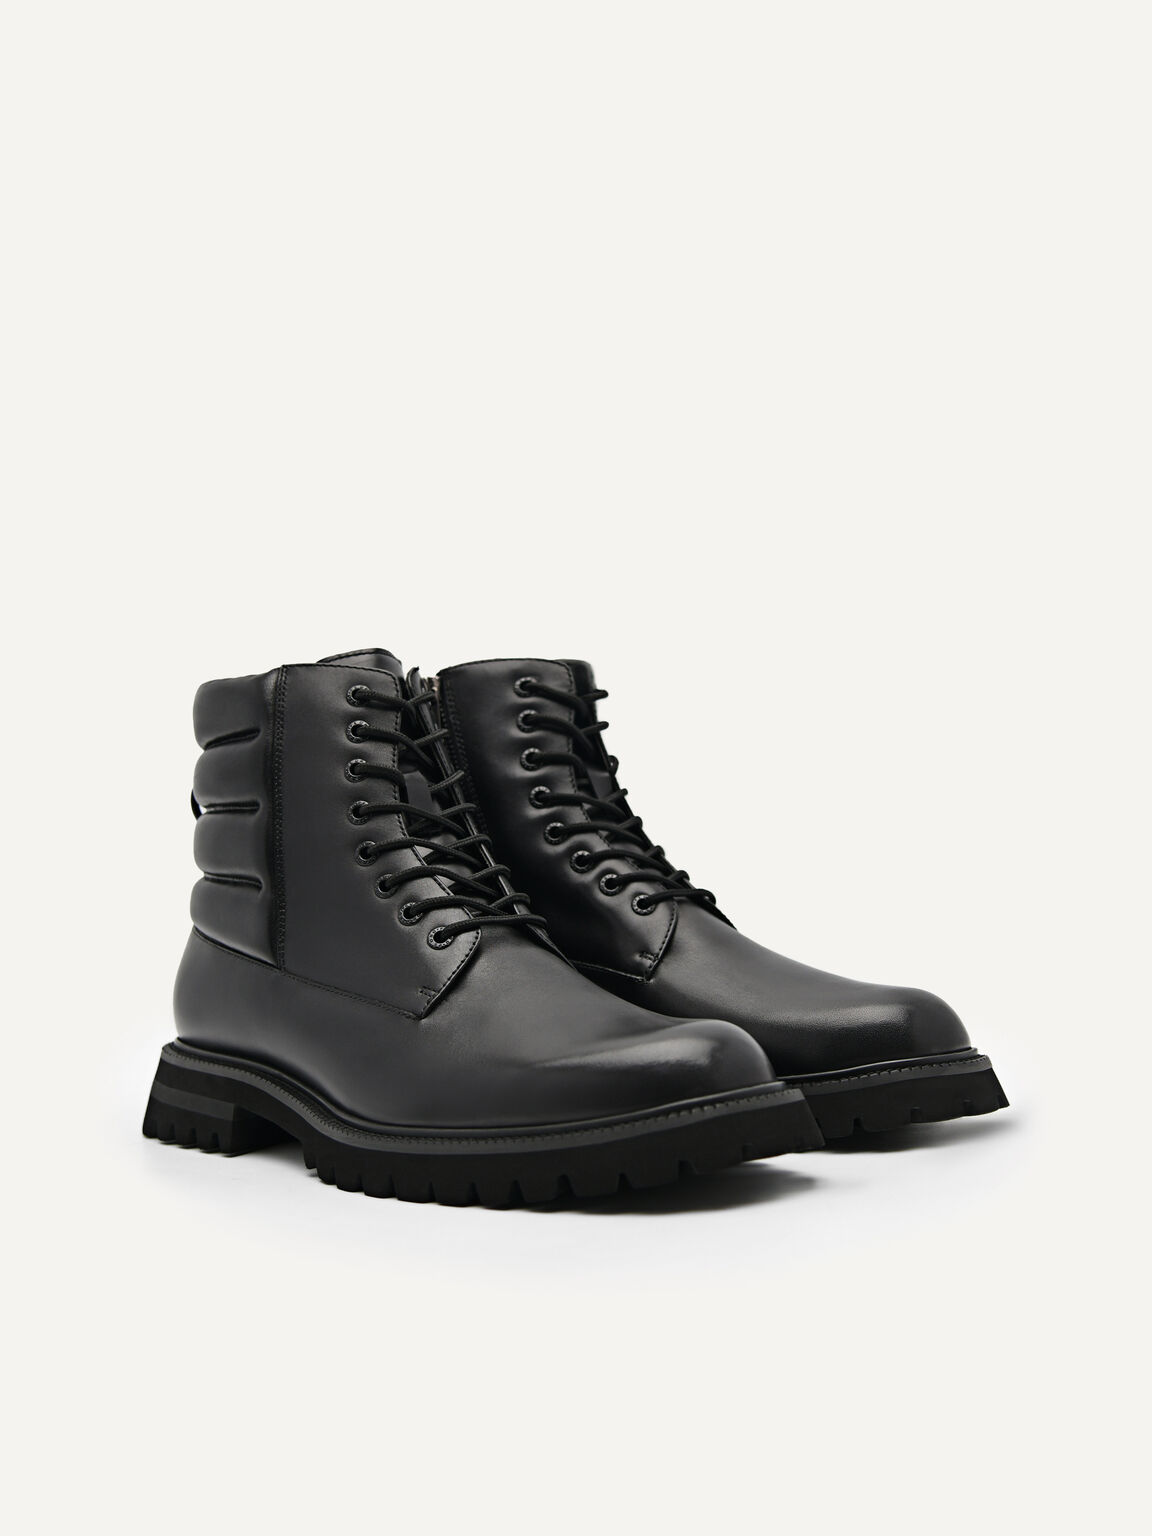 Jay Leather Boots, Black